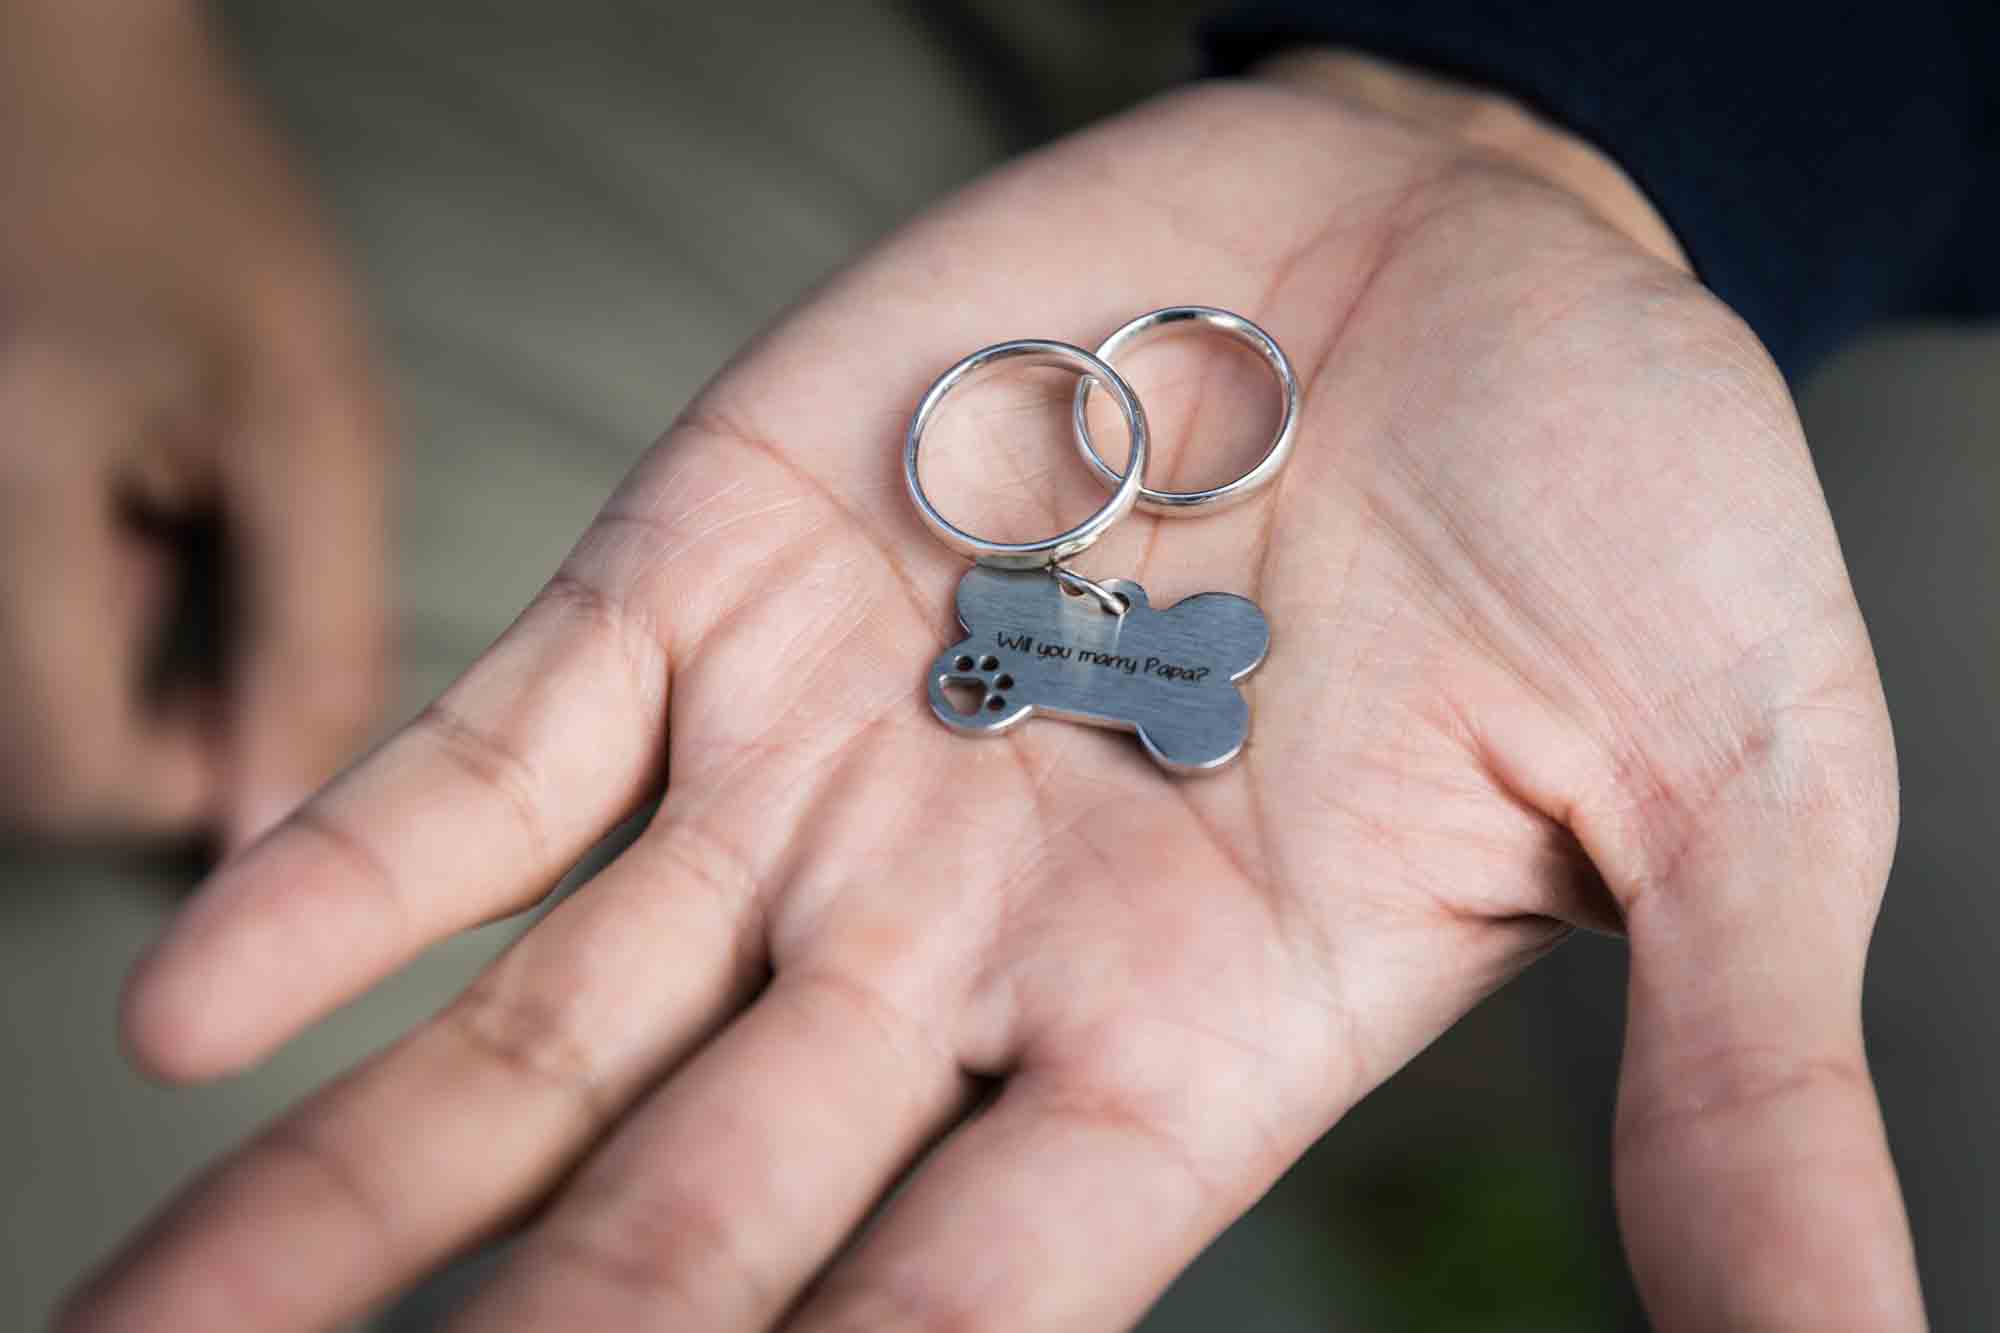 Man's palm holding two engagement rings and dog tag from a Central Park engagement photo shoot